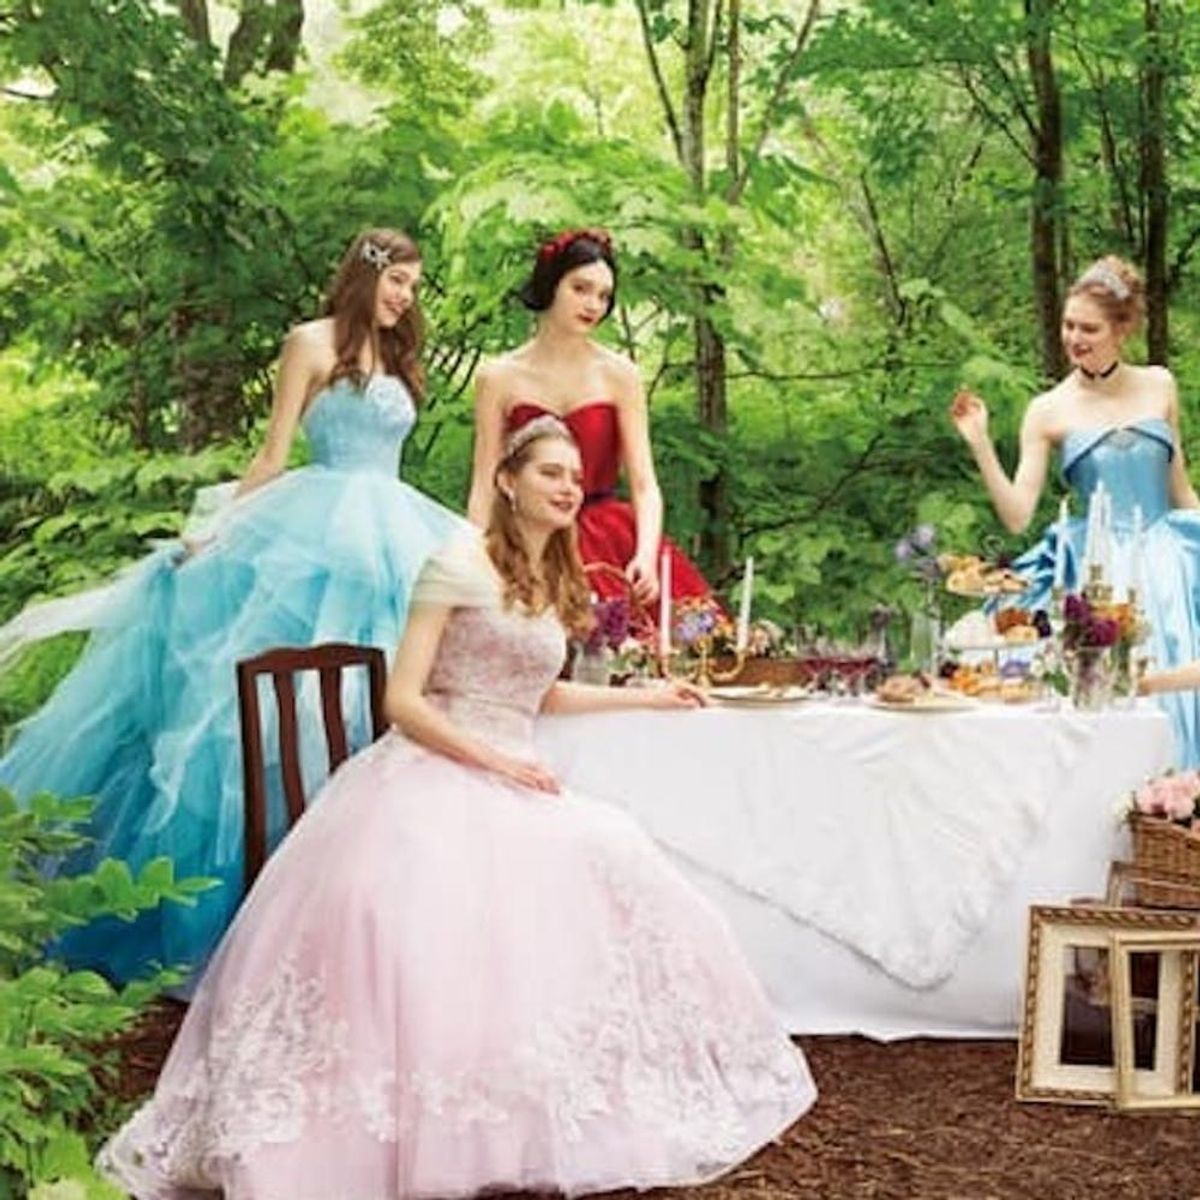 A Line of Disney Wedding Gowns Is Here to Make Your Every Wish Come True